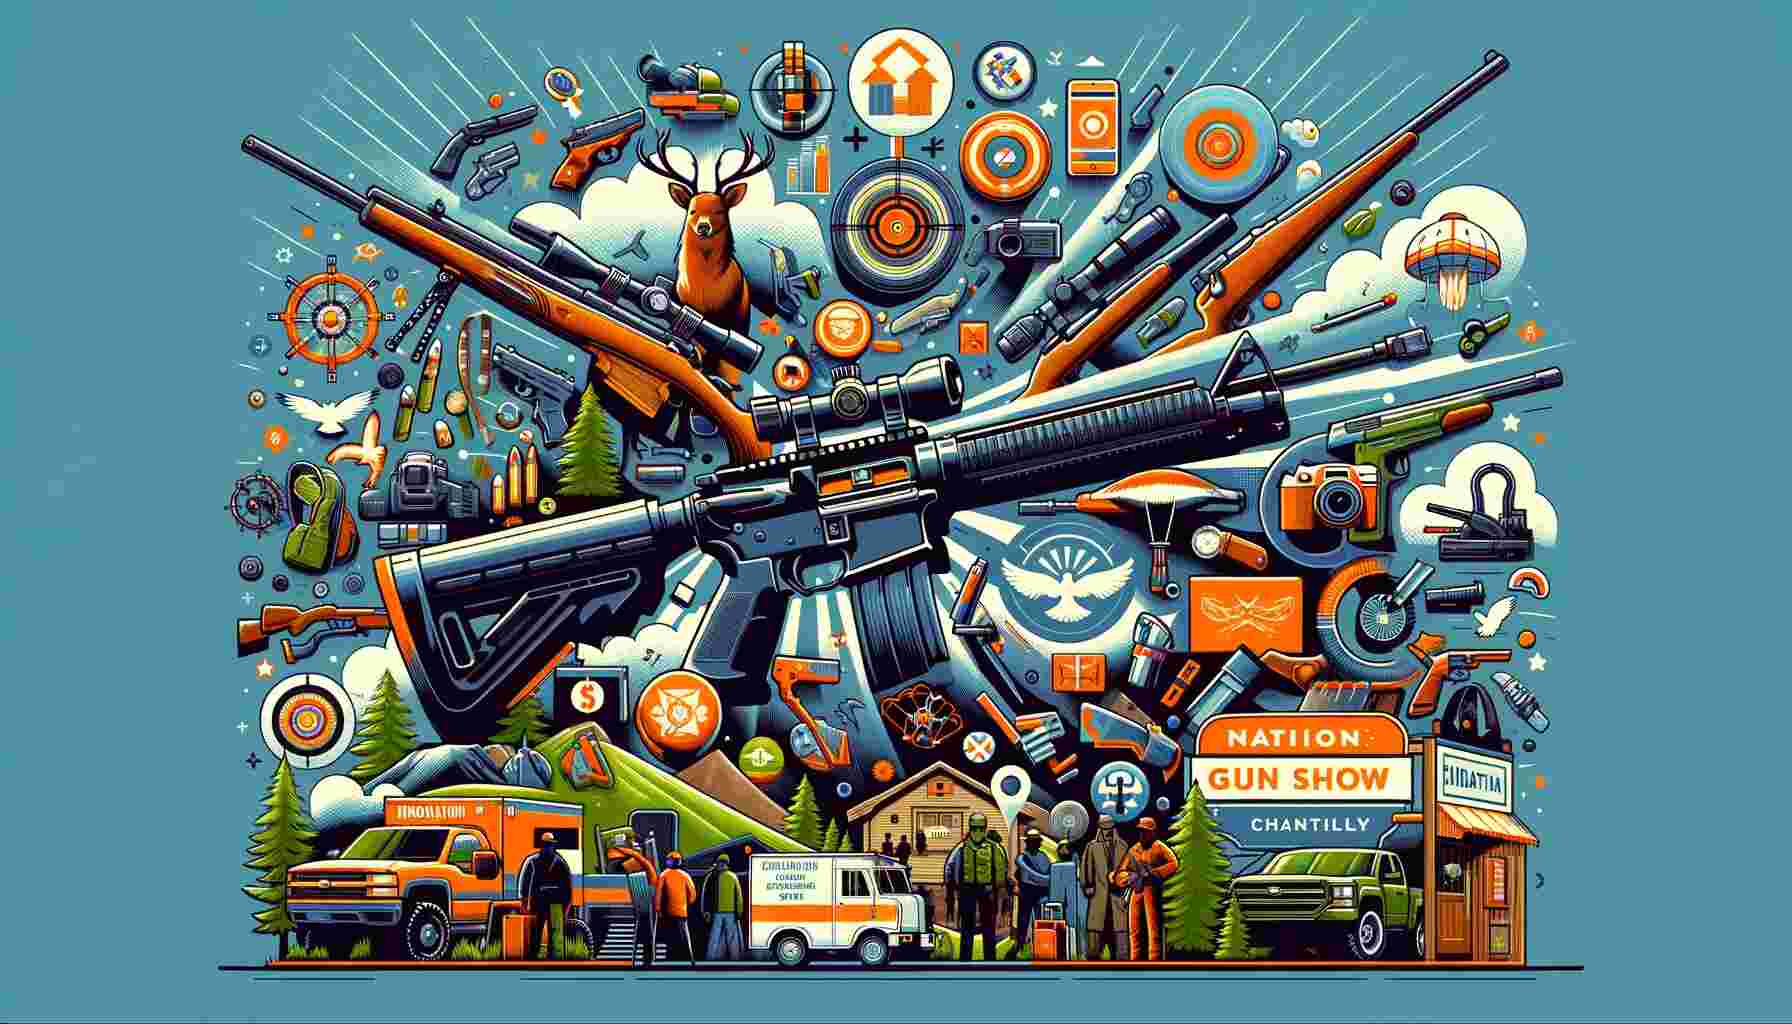 This image visually represents the essence of the event, highlighting the diverse range of firearms, hunting gear, and the educational opportunities that attendees can expect.